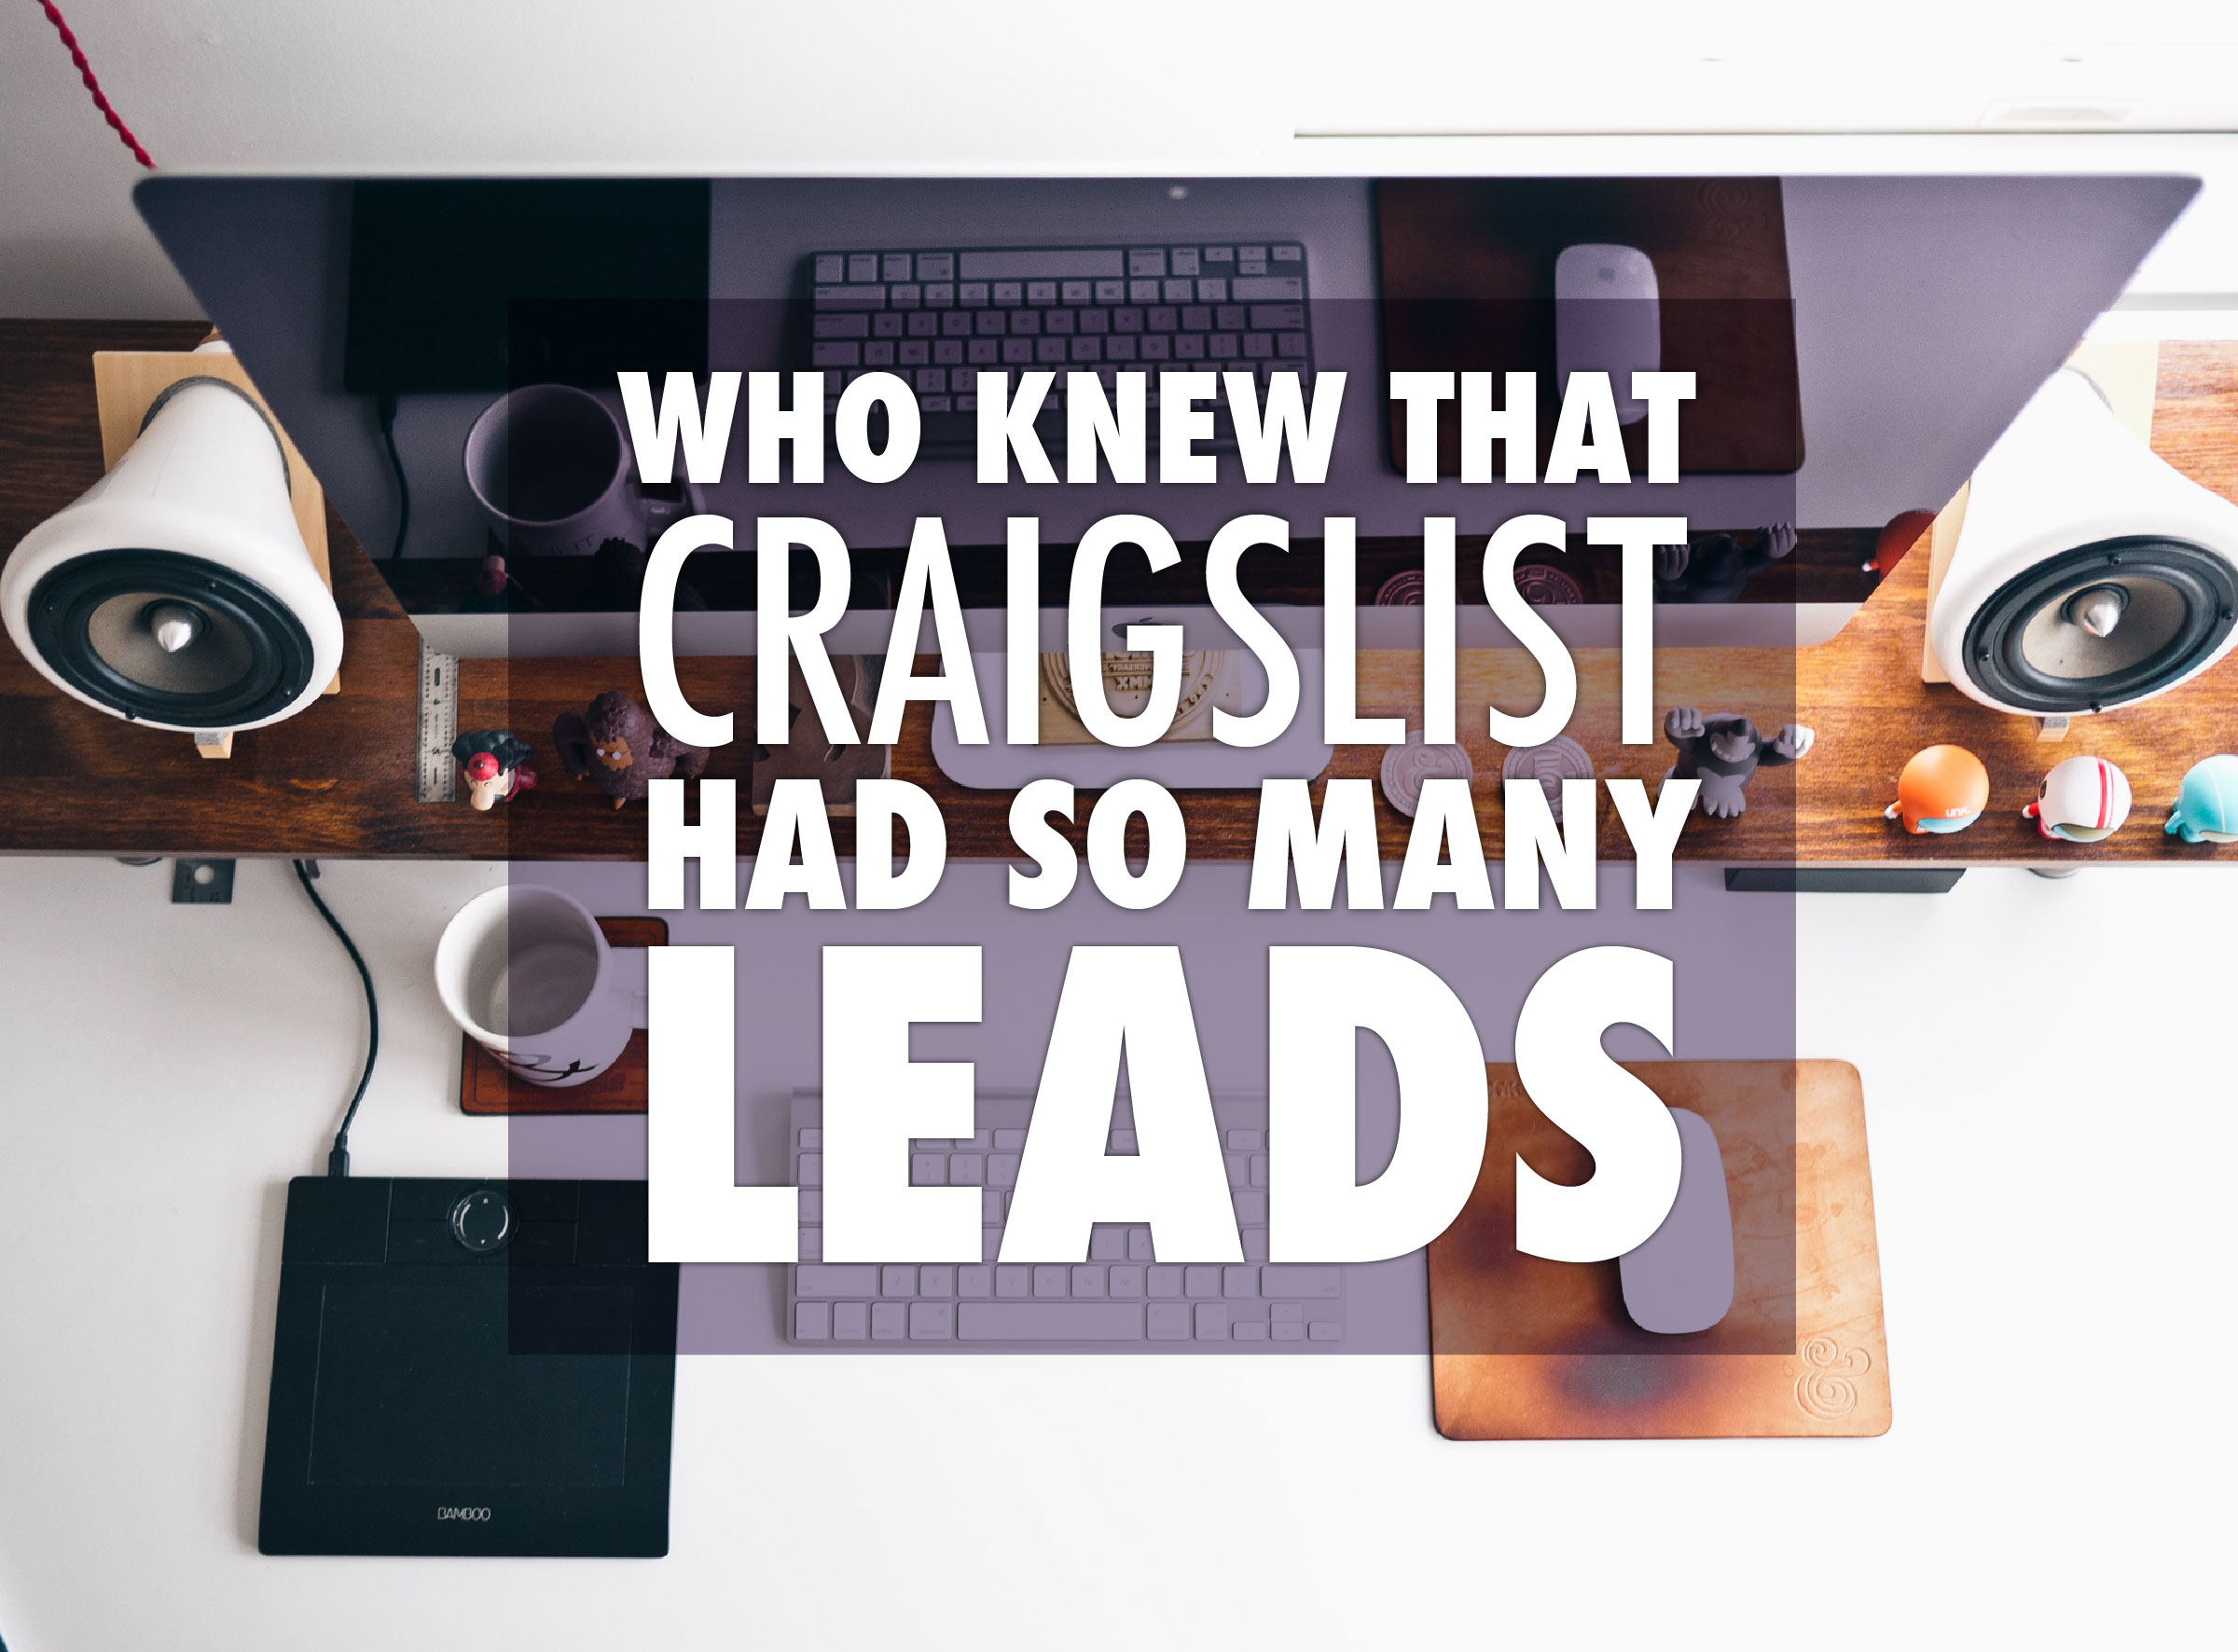 Get Real Estate Leads From Craigslist: The Definitive Guide